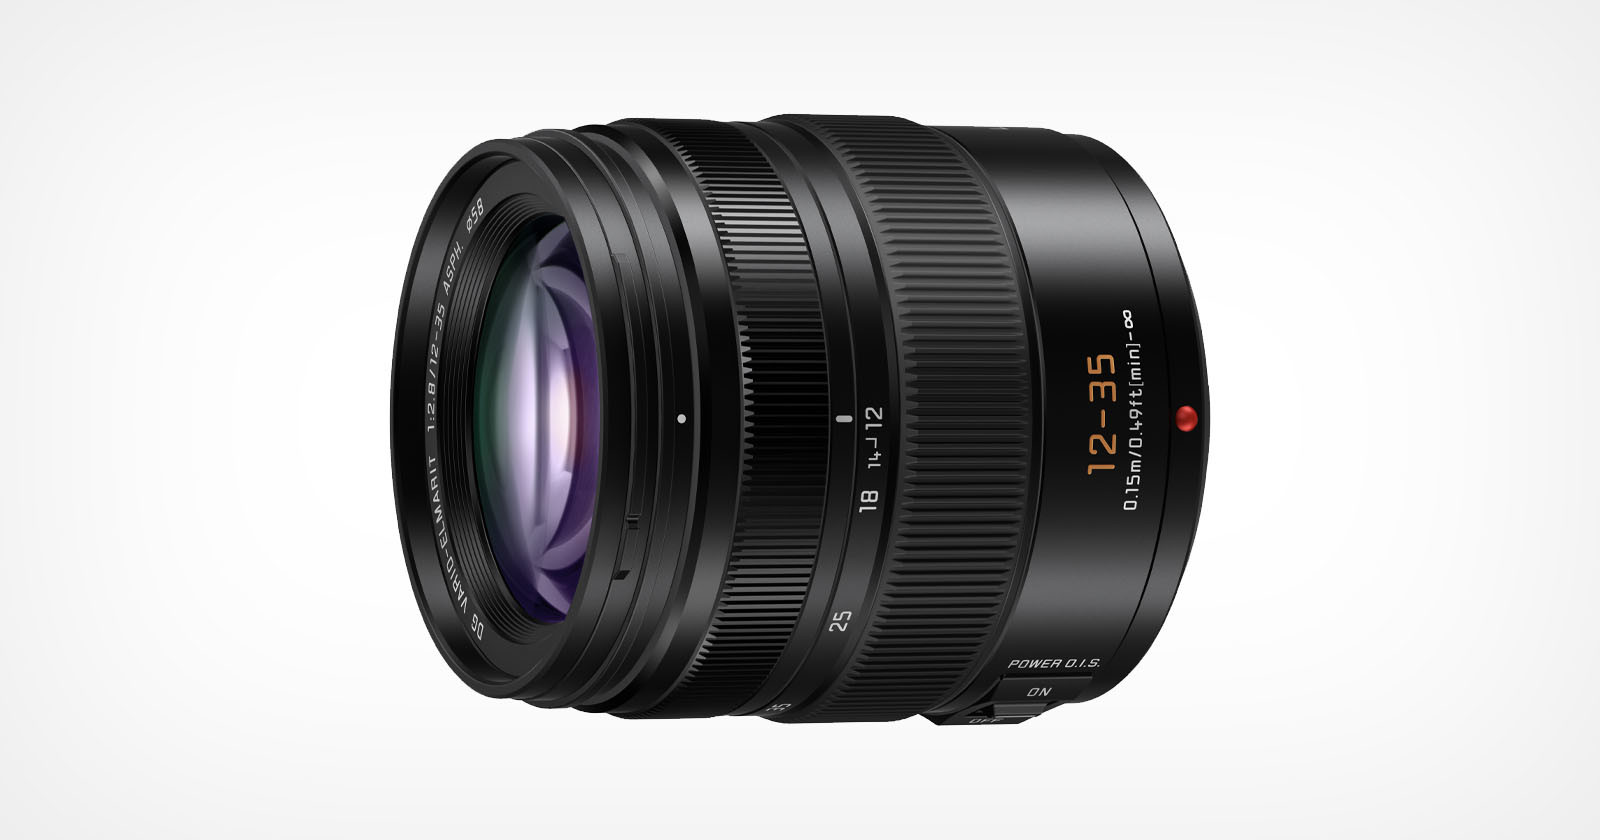 Panasonic Redesigns and Replaces the Lumix 12-35mm f/2.8